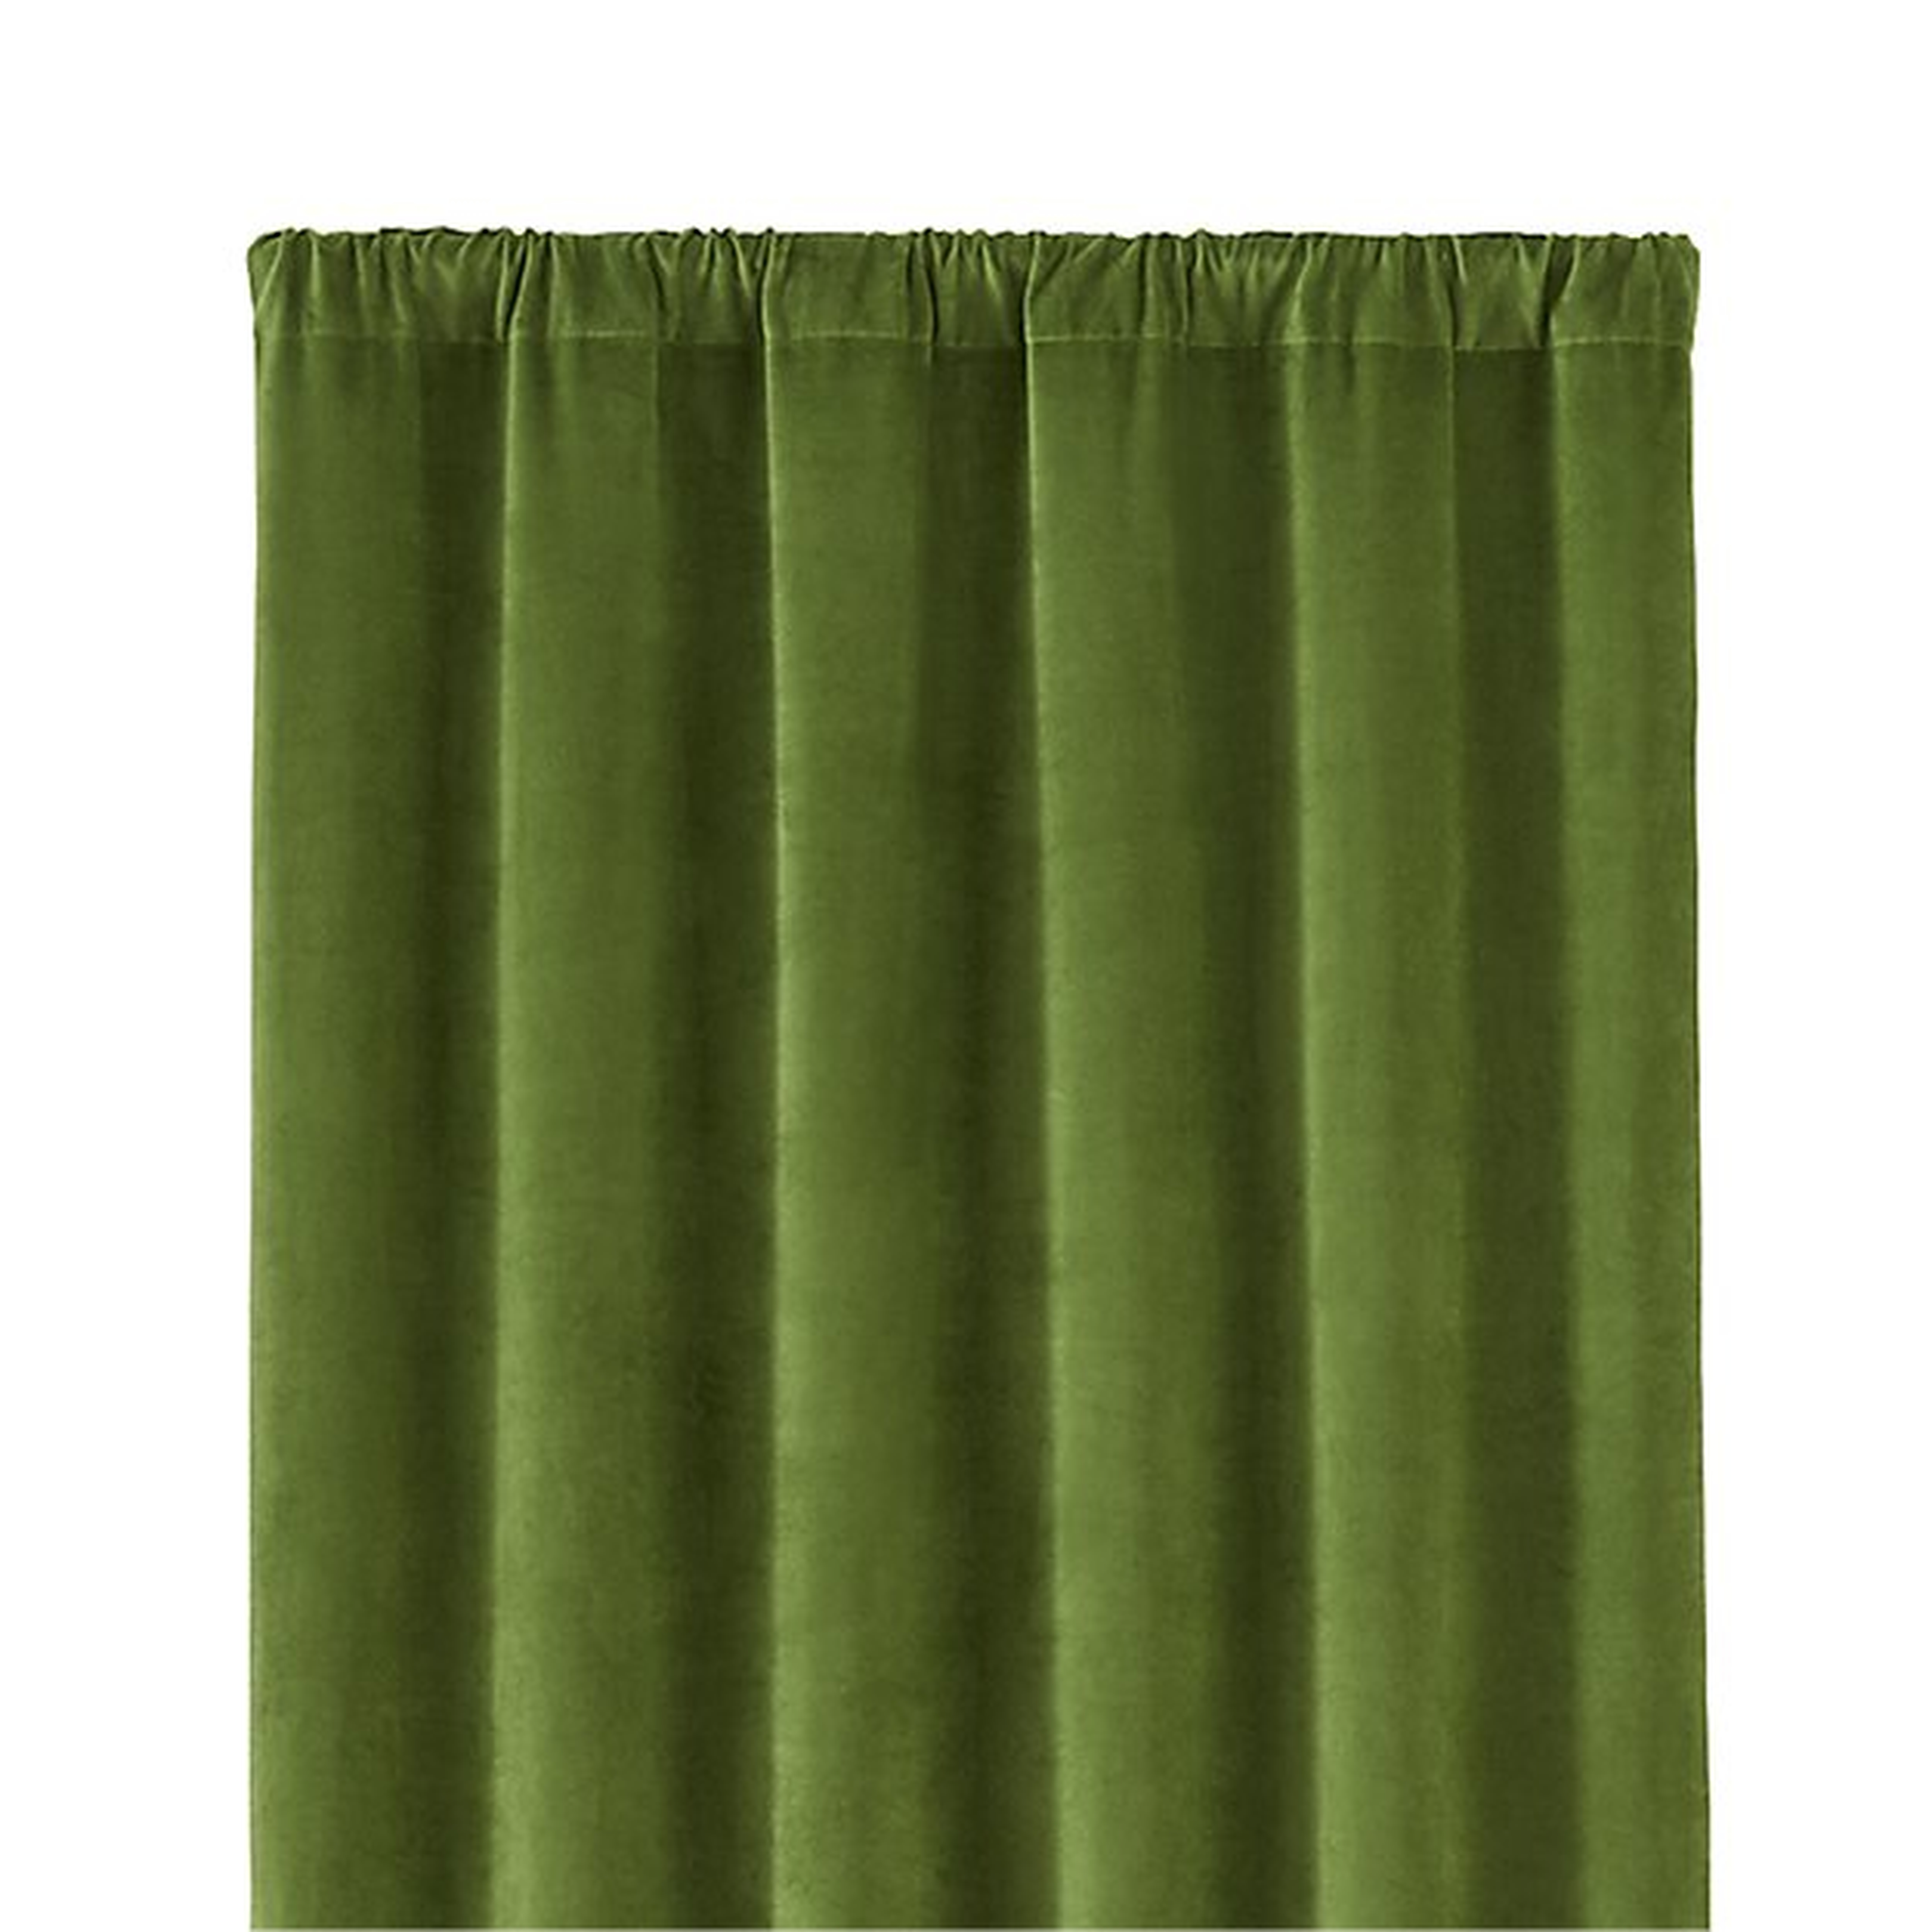 Windsor Green 48"x96" Curtain Panel - Crate and Barrel